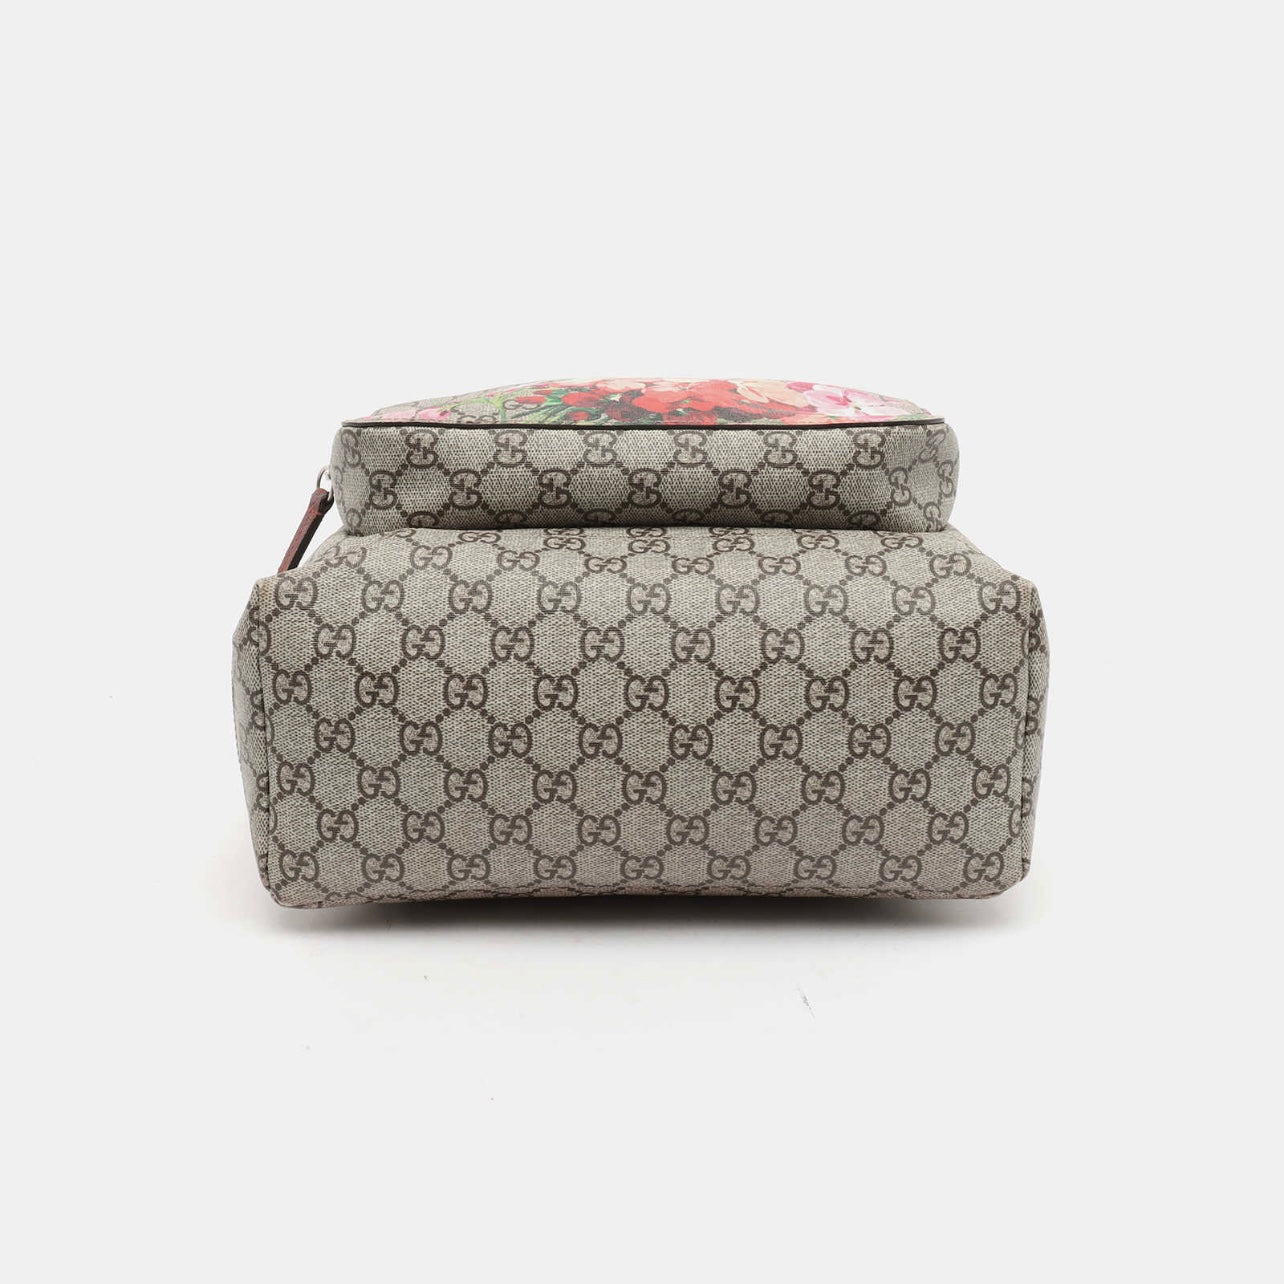 Gucci GG Supreme Monogram Blooms Large Zip Pouch